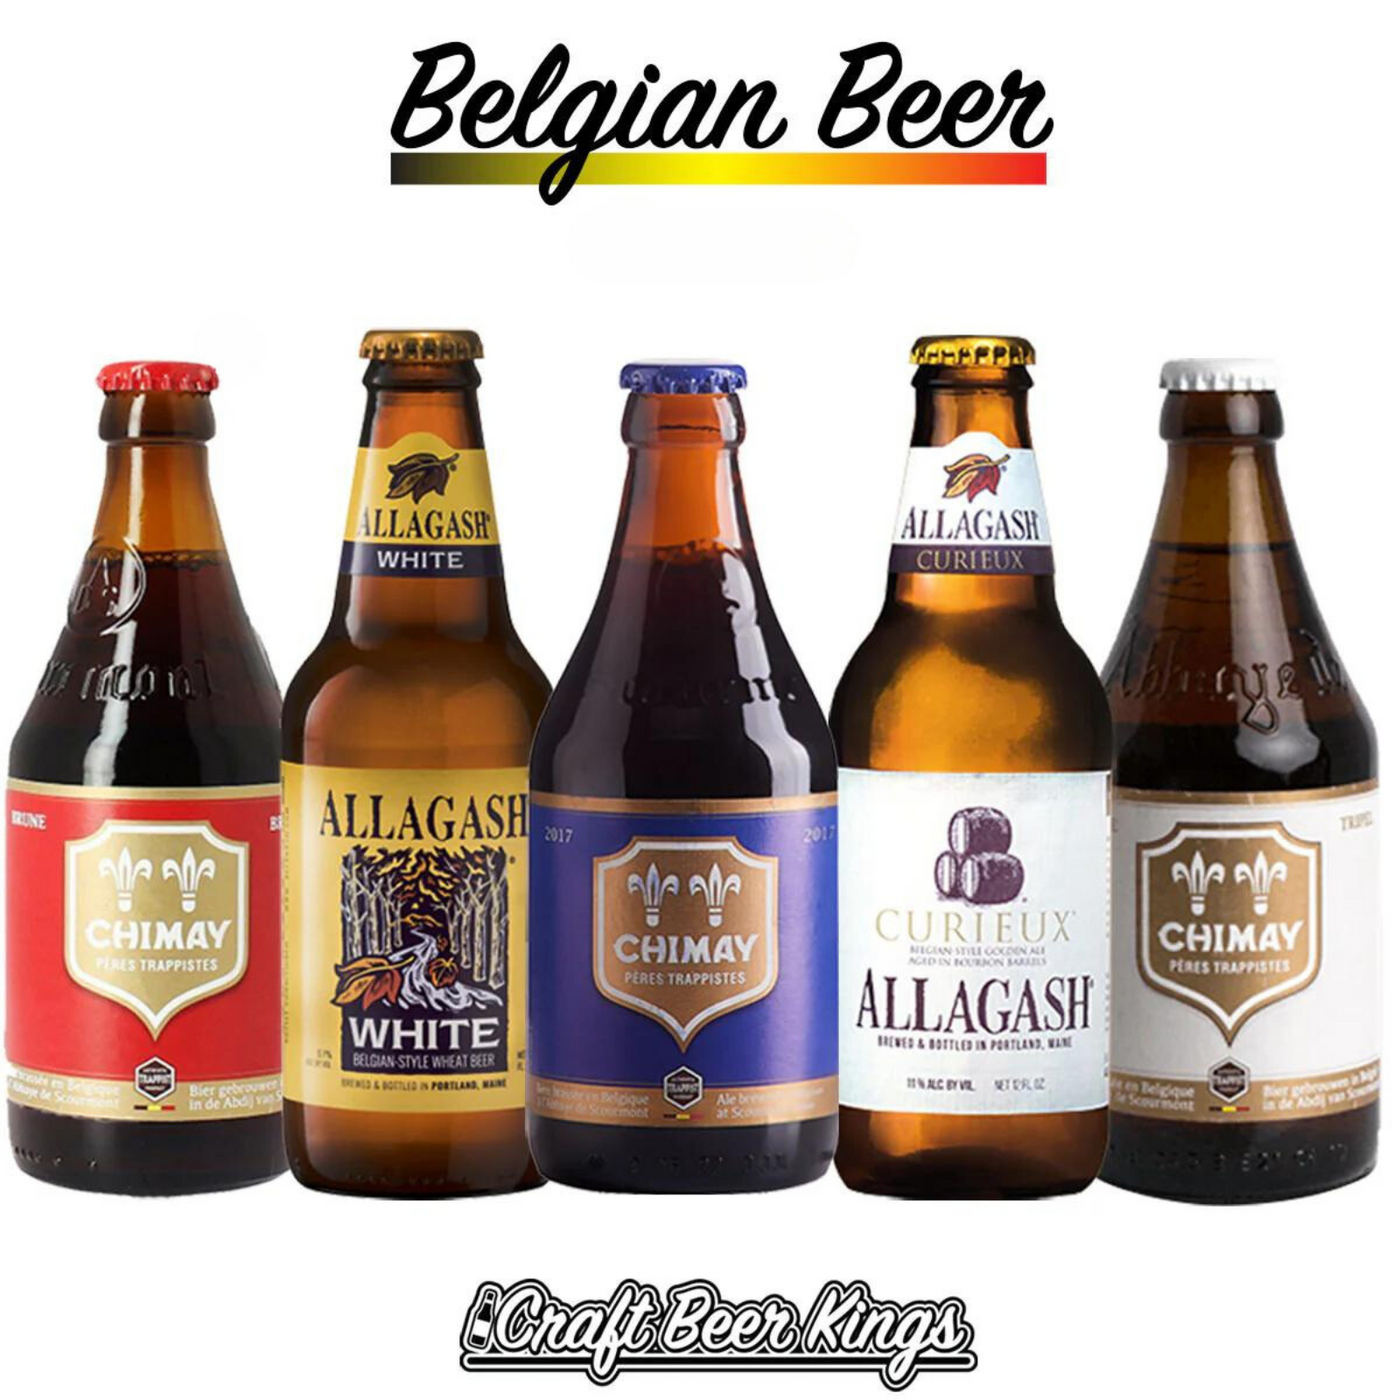 Belgian Gift Box - Shipping Included!